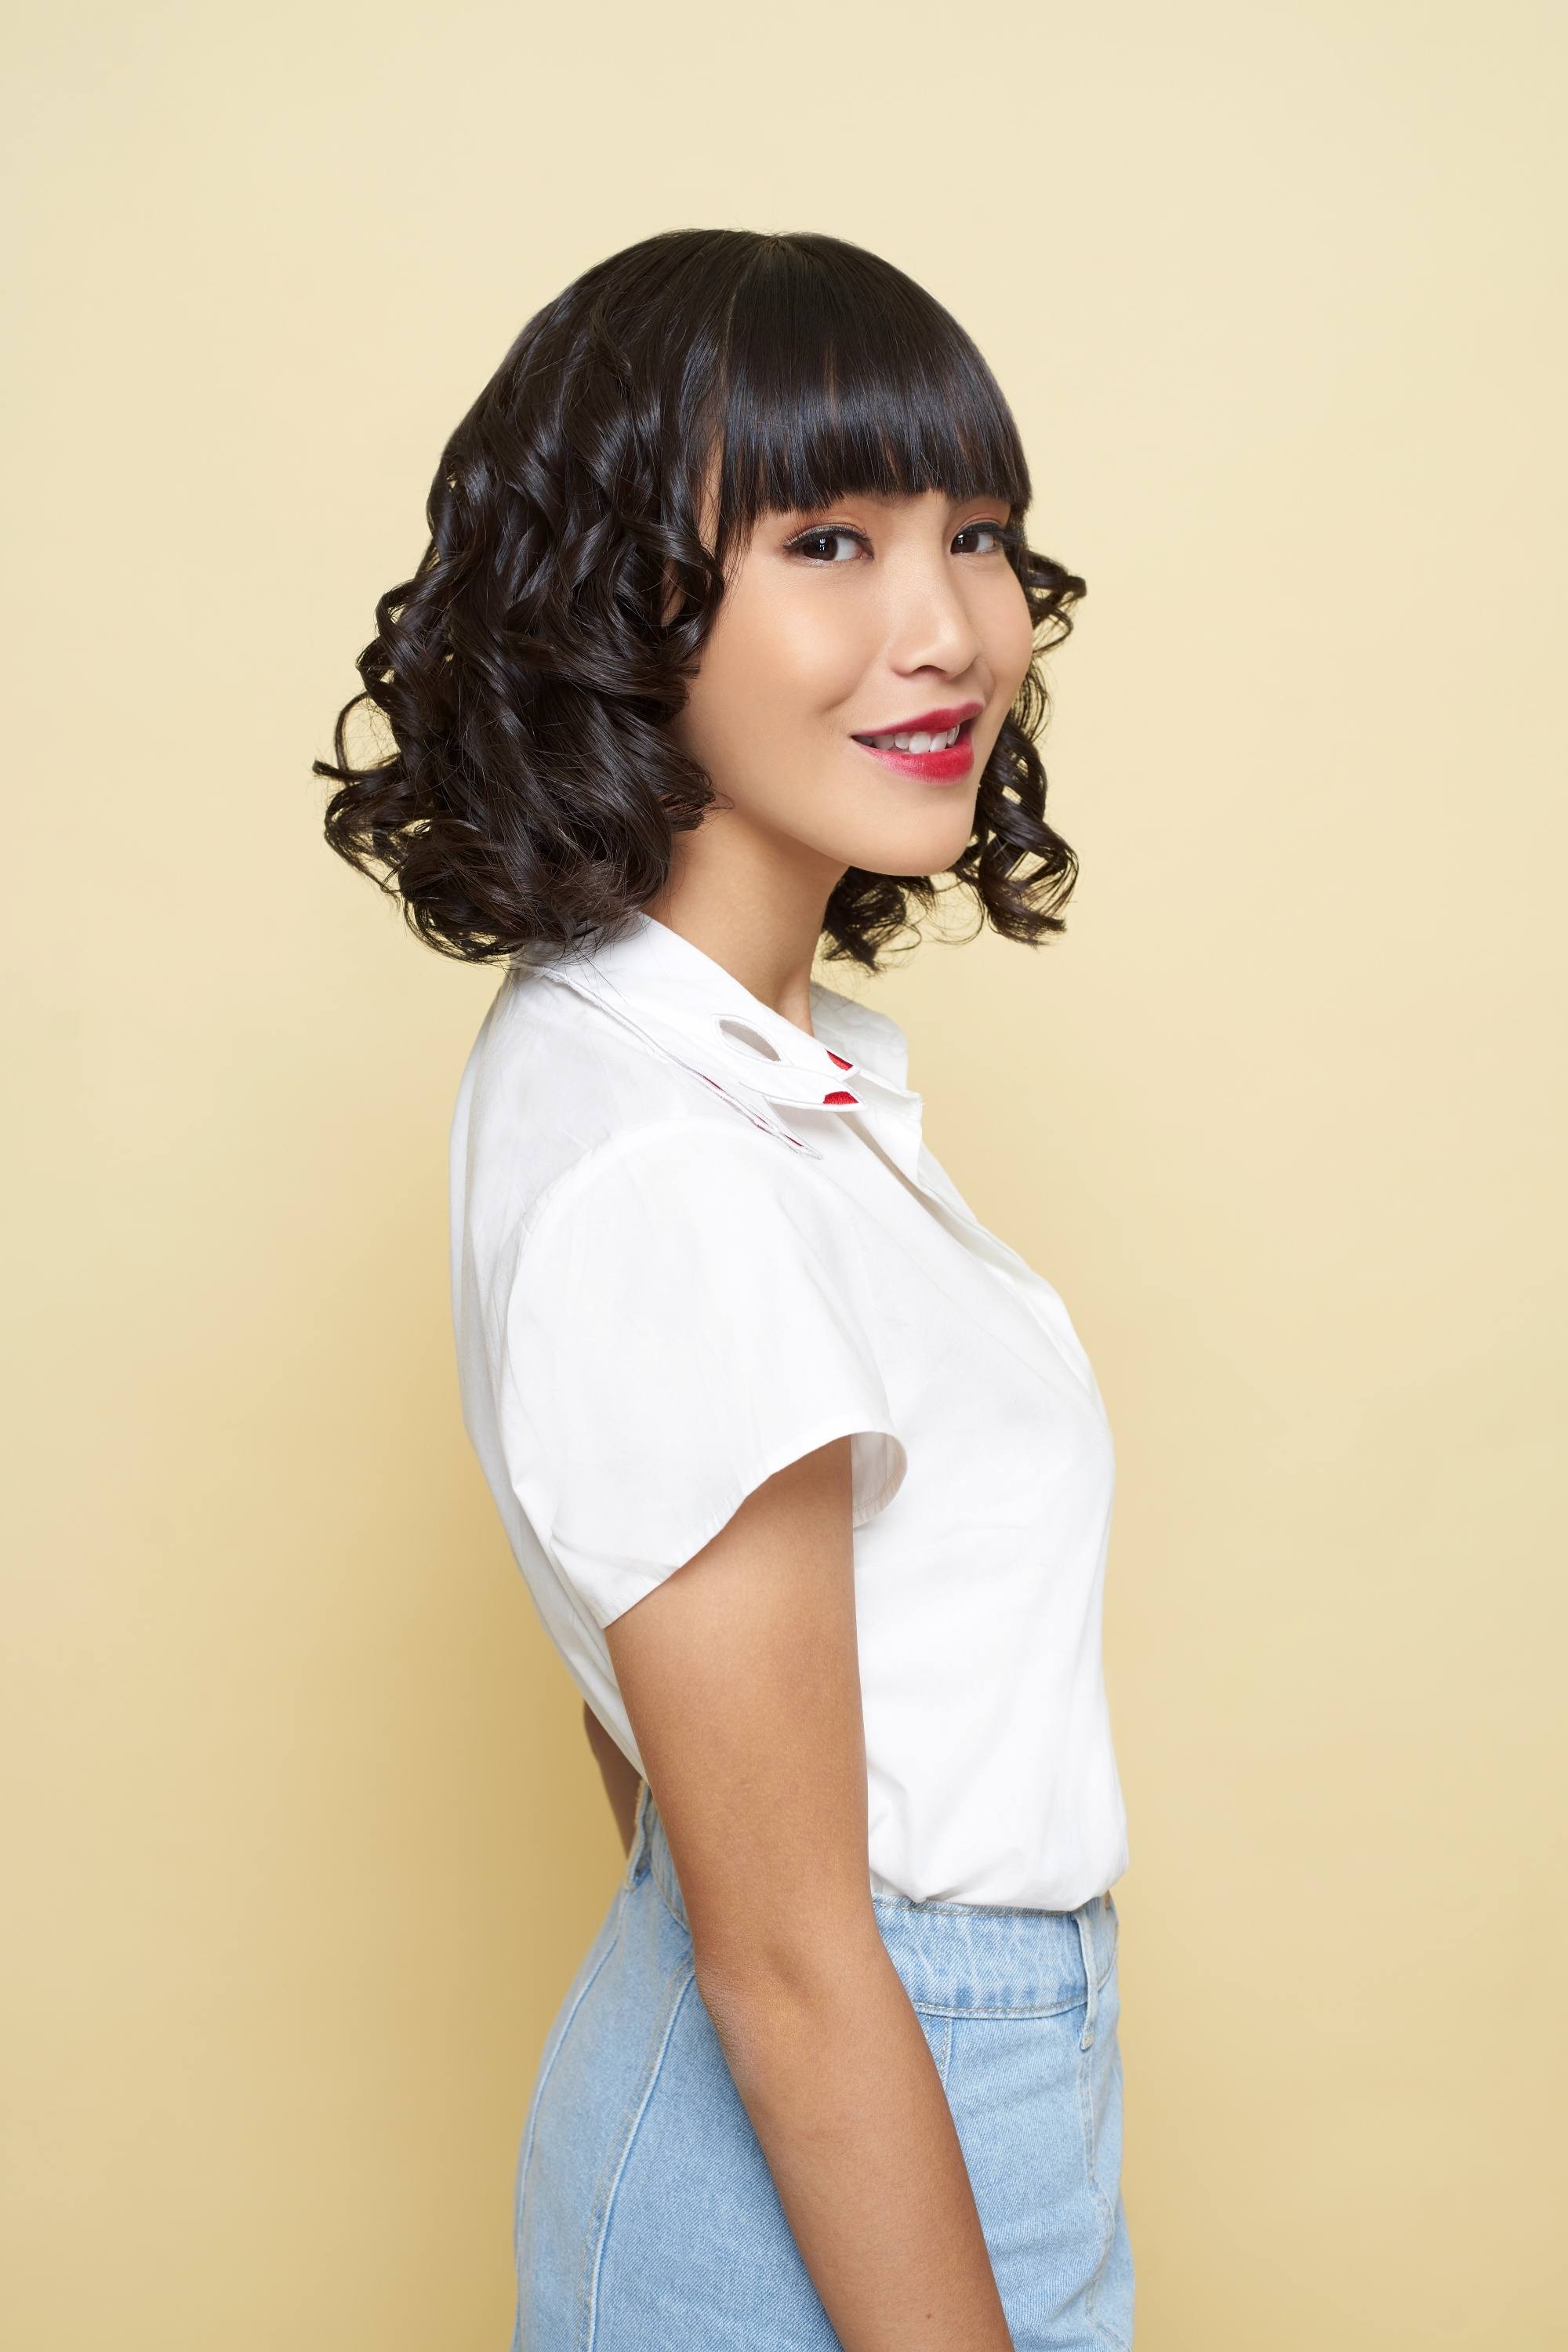 Asian woman with short curly hair with bangs wearing a white top and denim skirt smiling